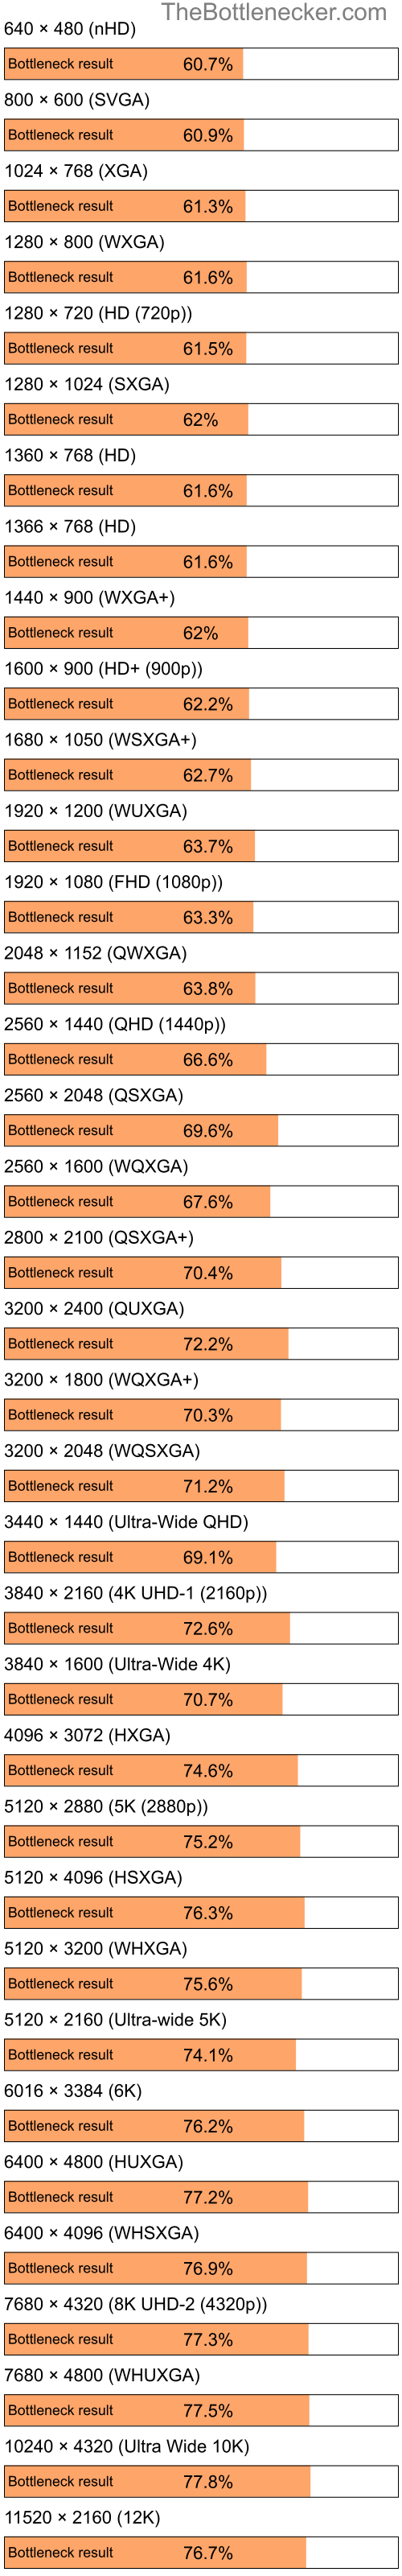 Bottleneck results by resolution for Intel Atom Z520 and AMD M880G with Mobility Radeon HD 4250 in General Tasks